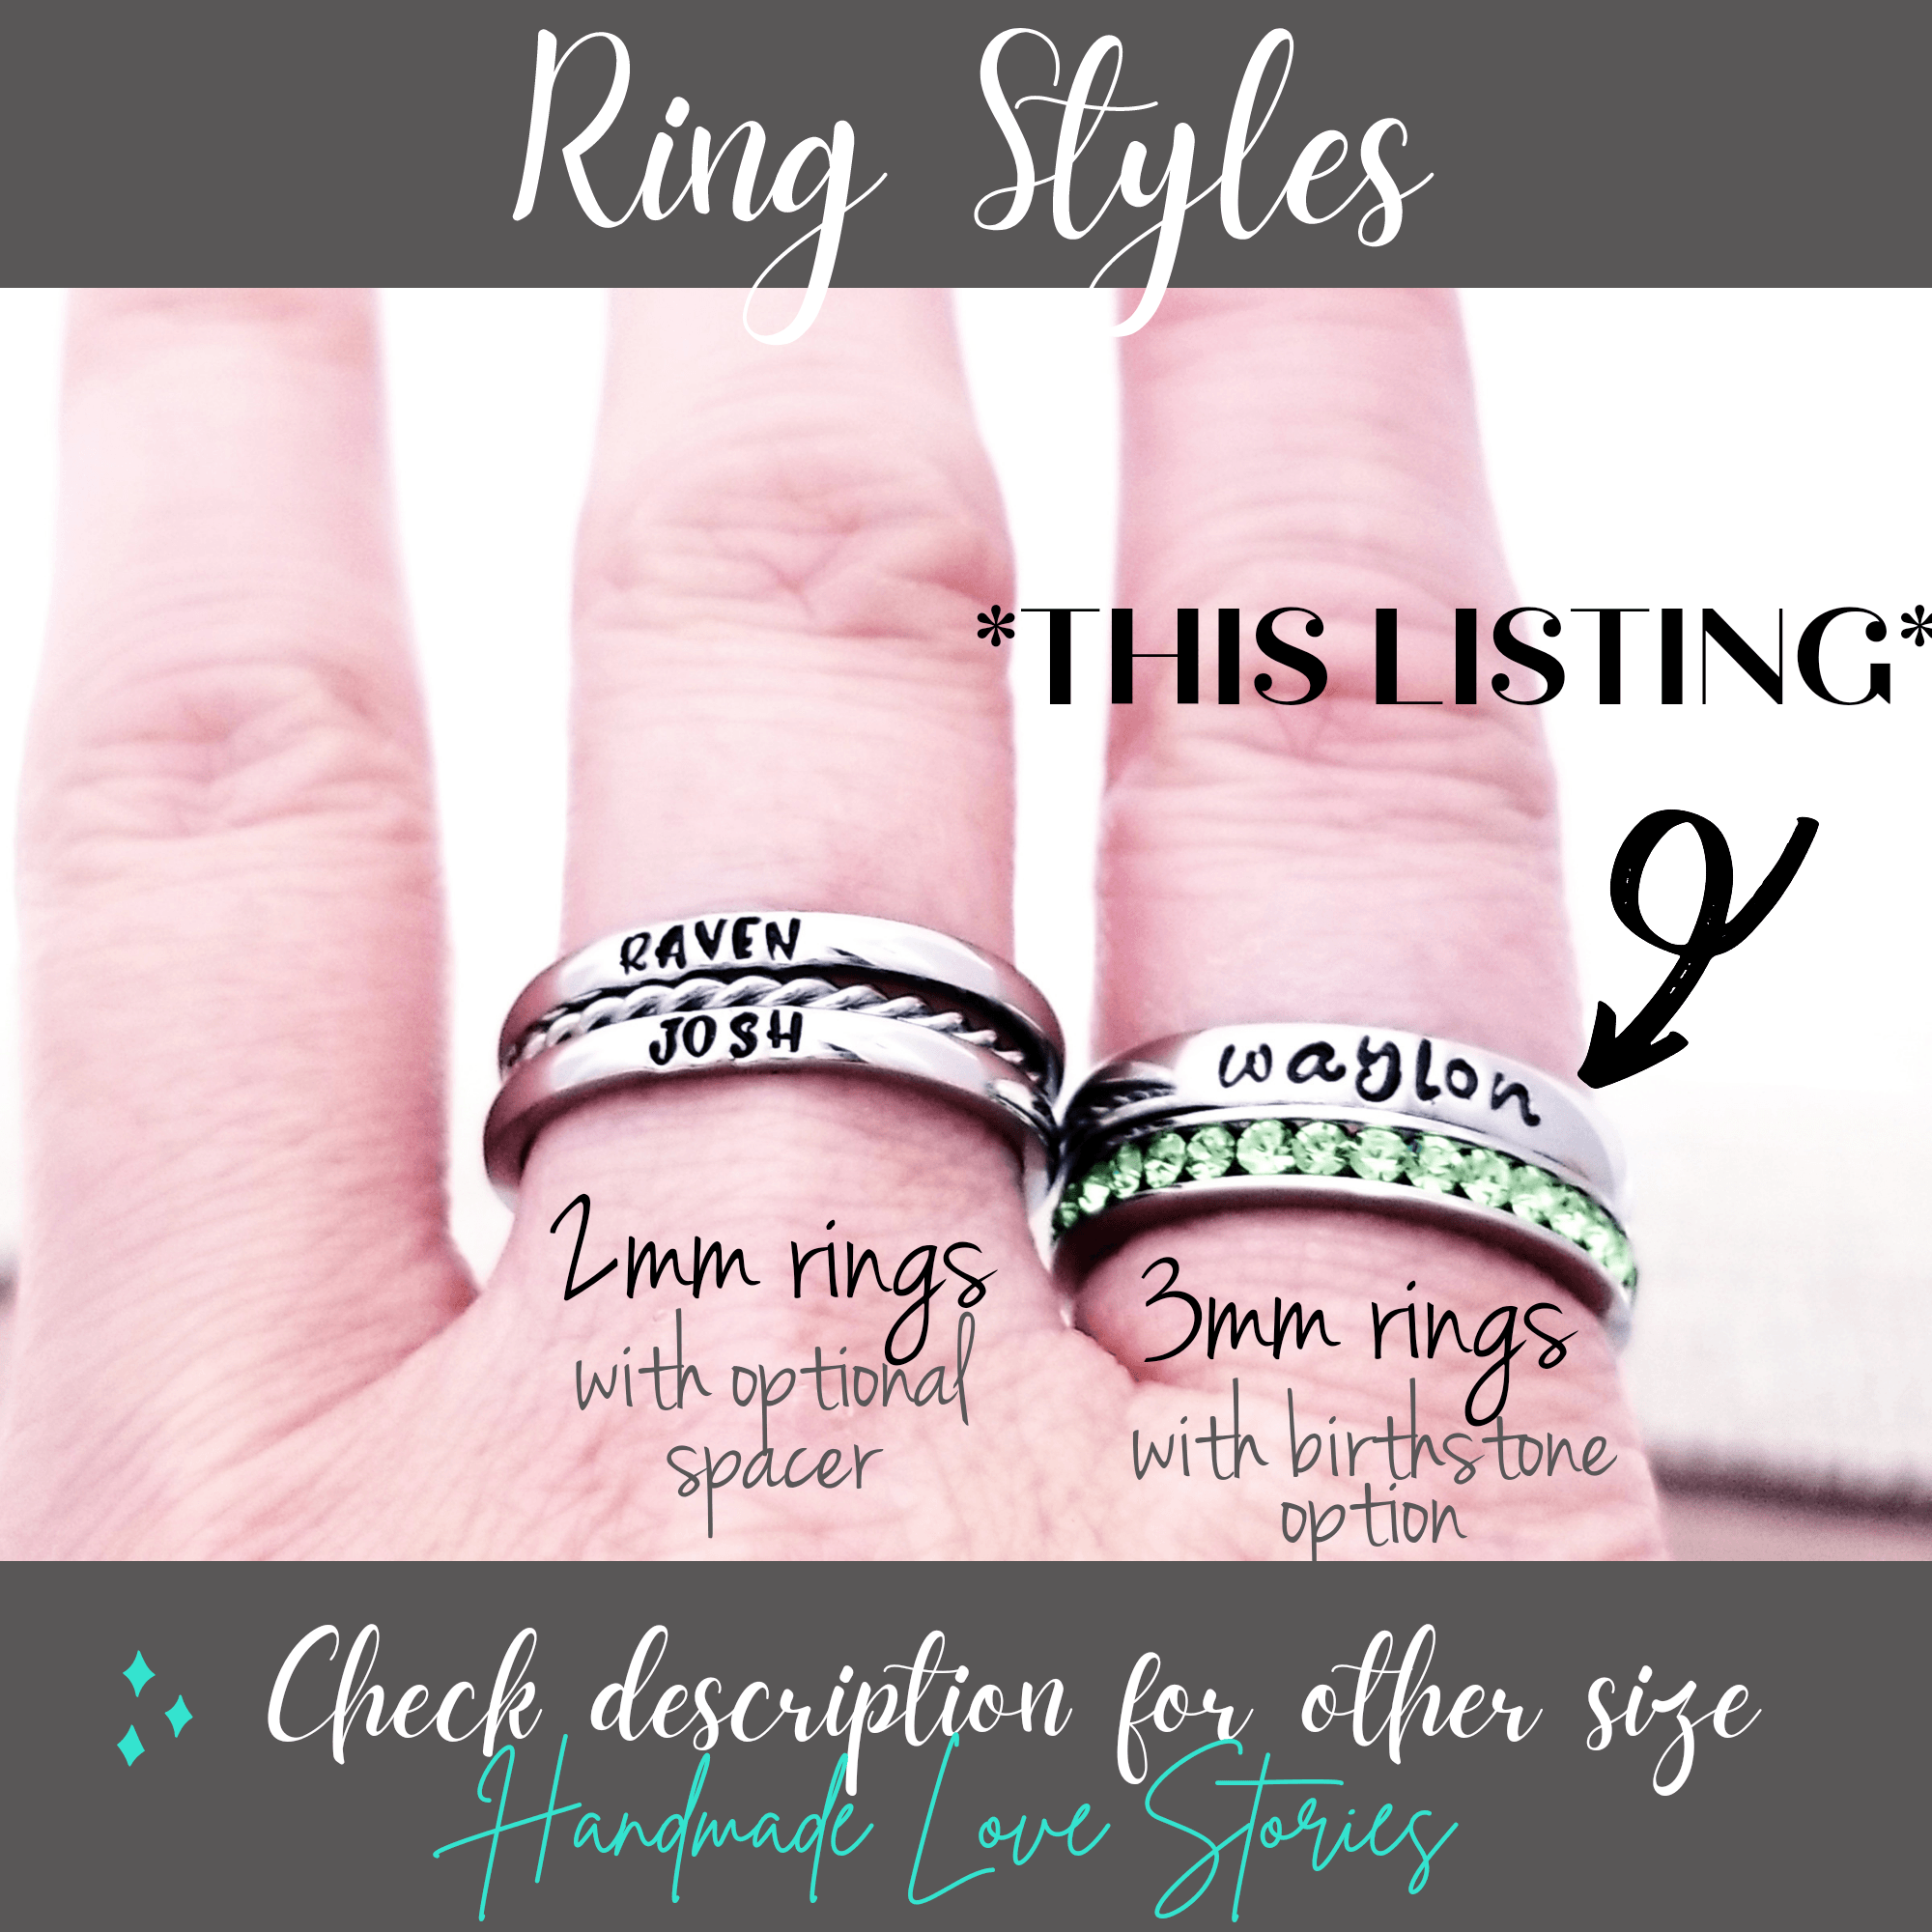 Stackable Name Rings, Custom Hand Stamped Rings, Personalized Gift, Eternity rings, Stainless Steel, Facebook